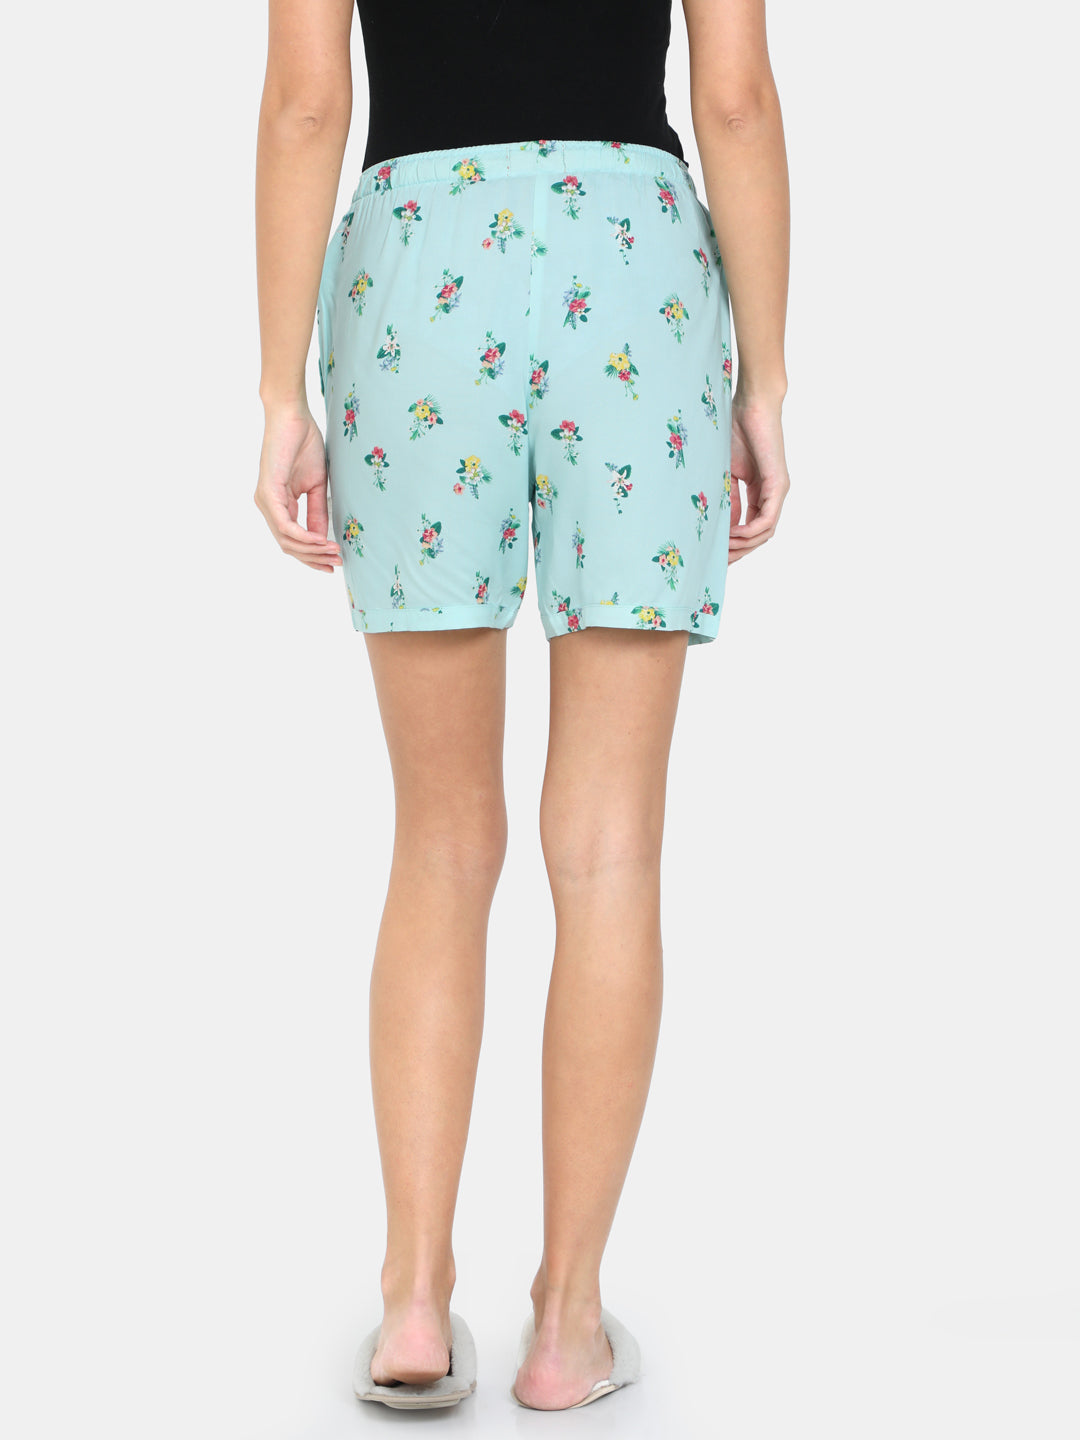 The Blooming Blue Women Summer Shorts